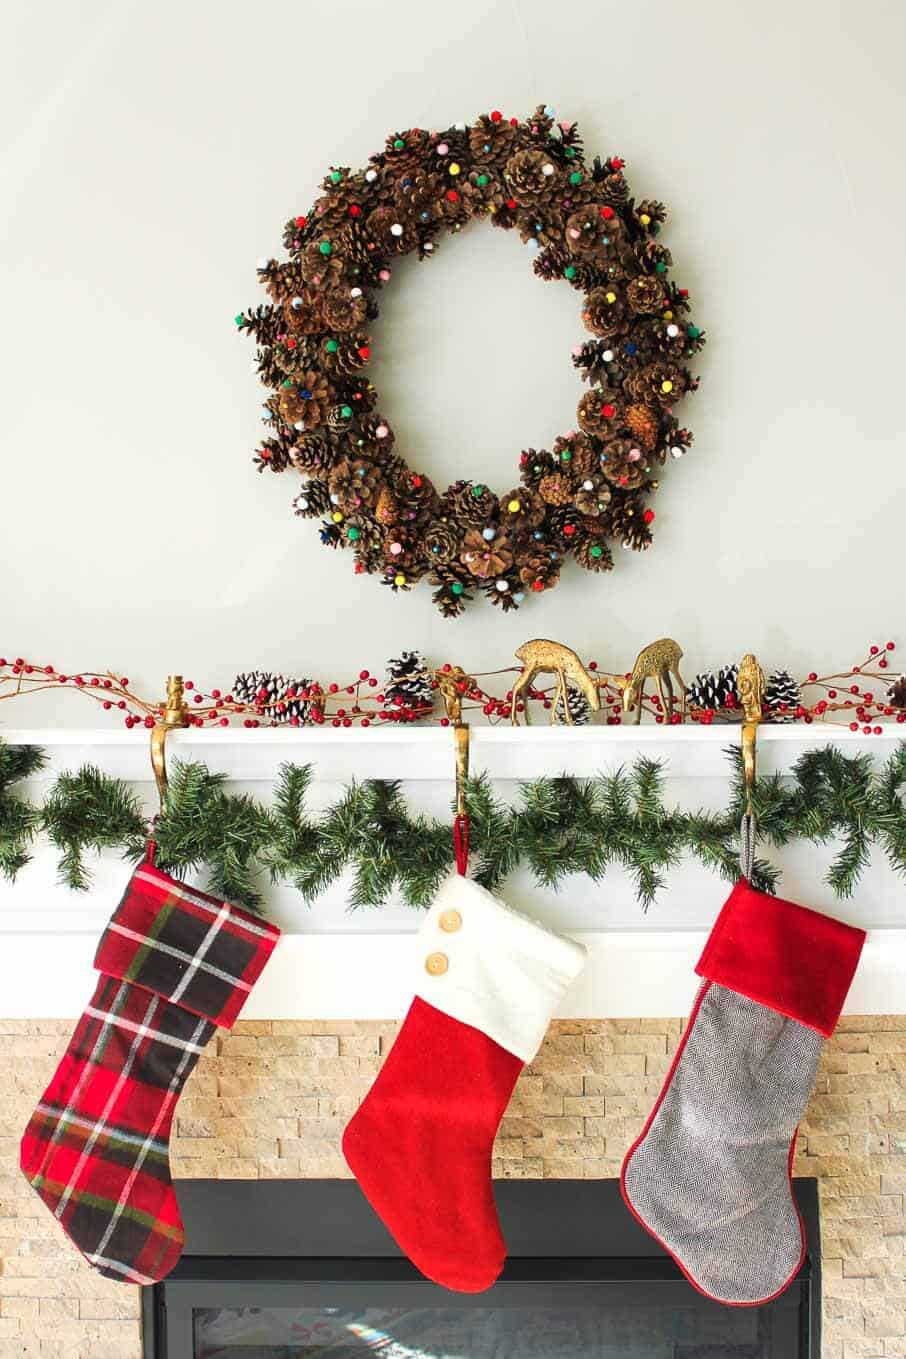 This DIY pinecone wreath is made with adorable little pom poms and costs less than $6 total! Perfect for the Christmas season and beyond. Click to view the full tutorial. | MakeAndDoCrew.com